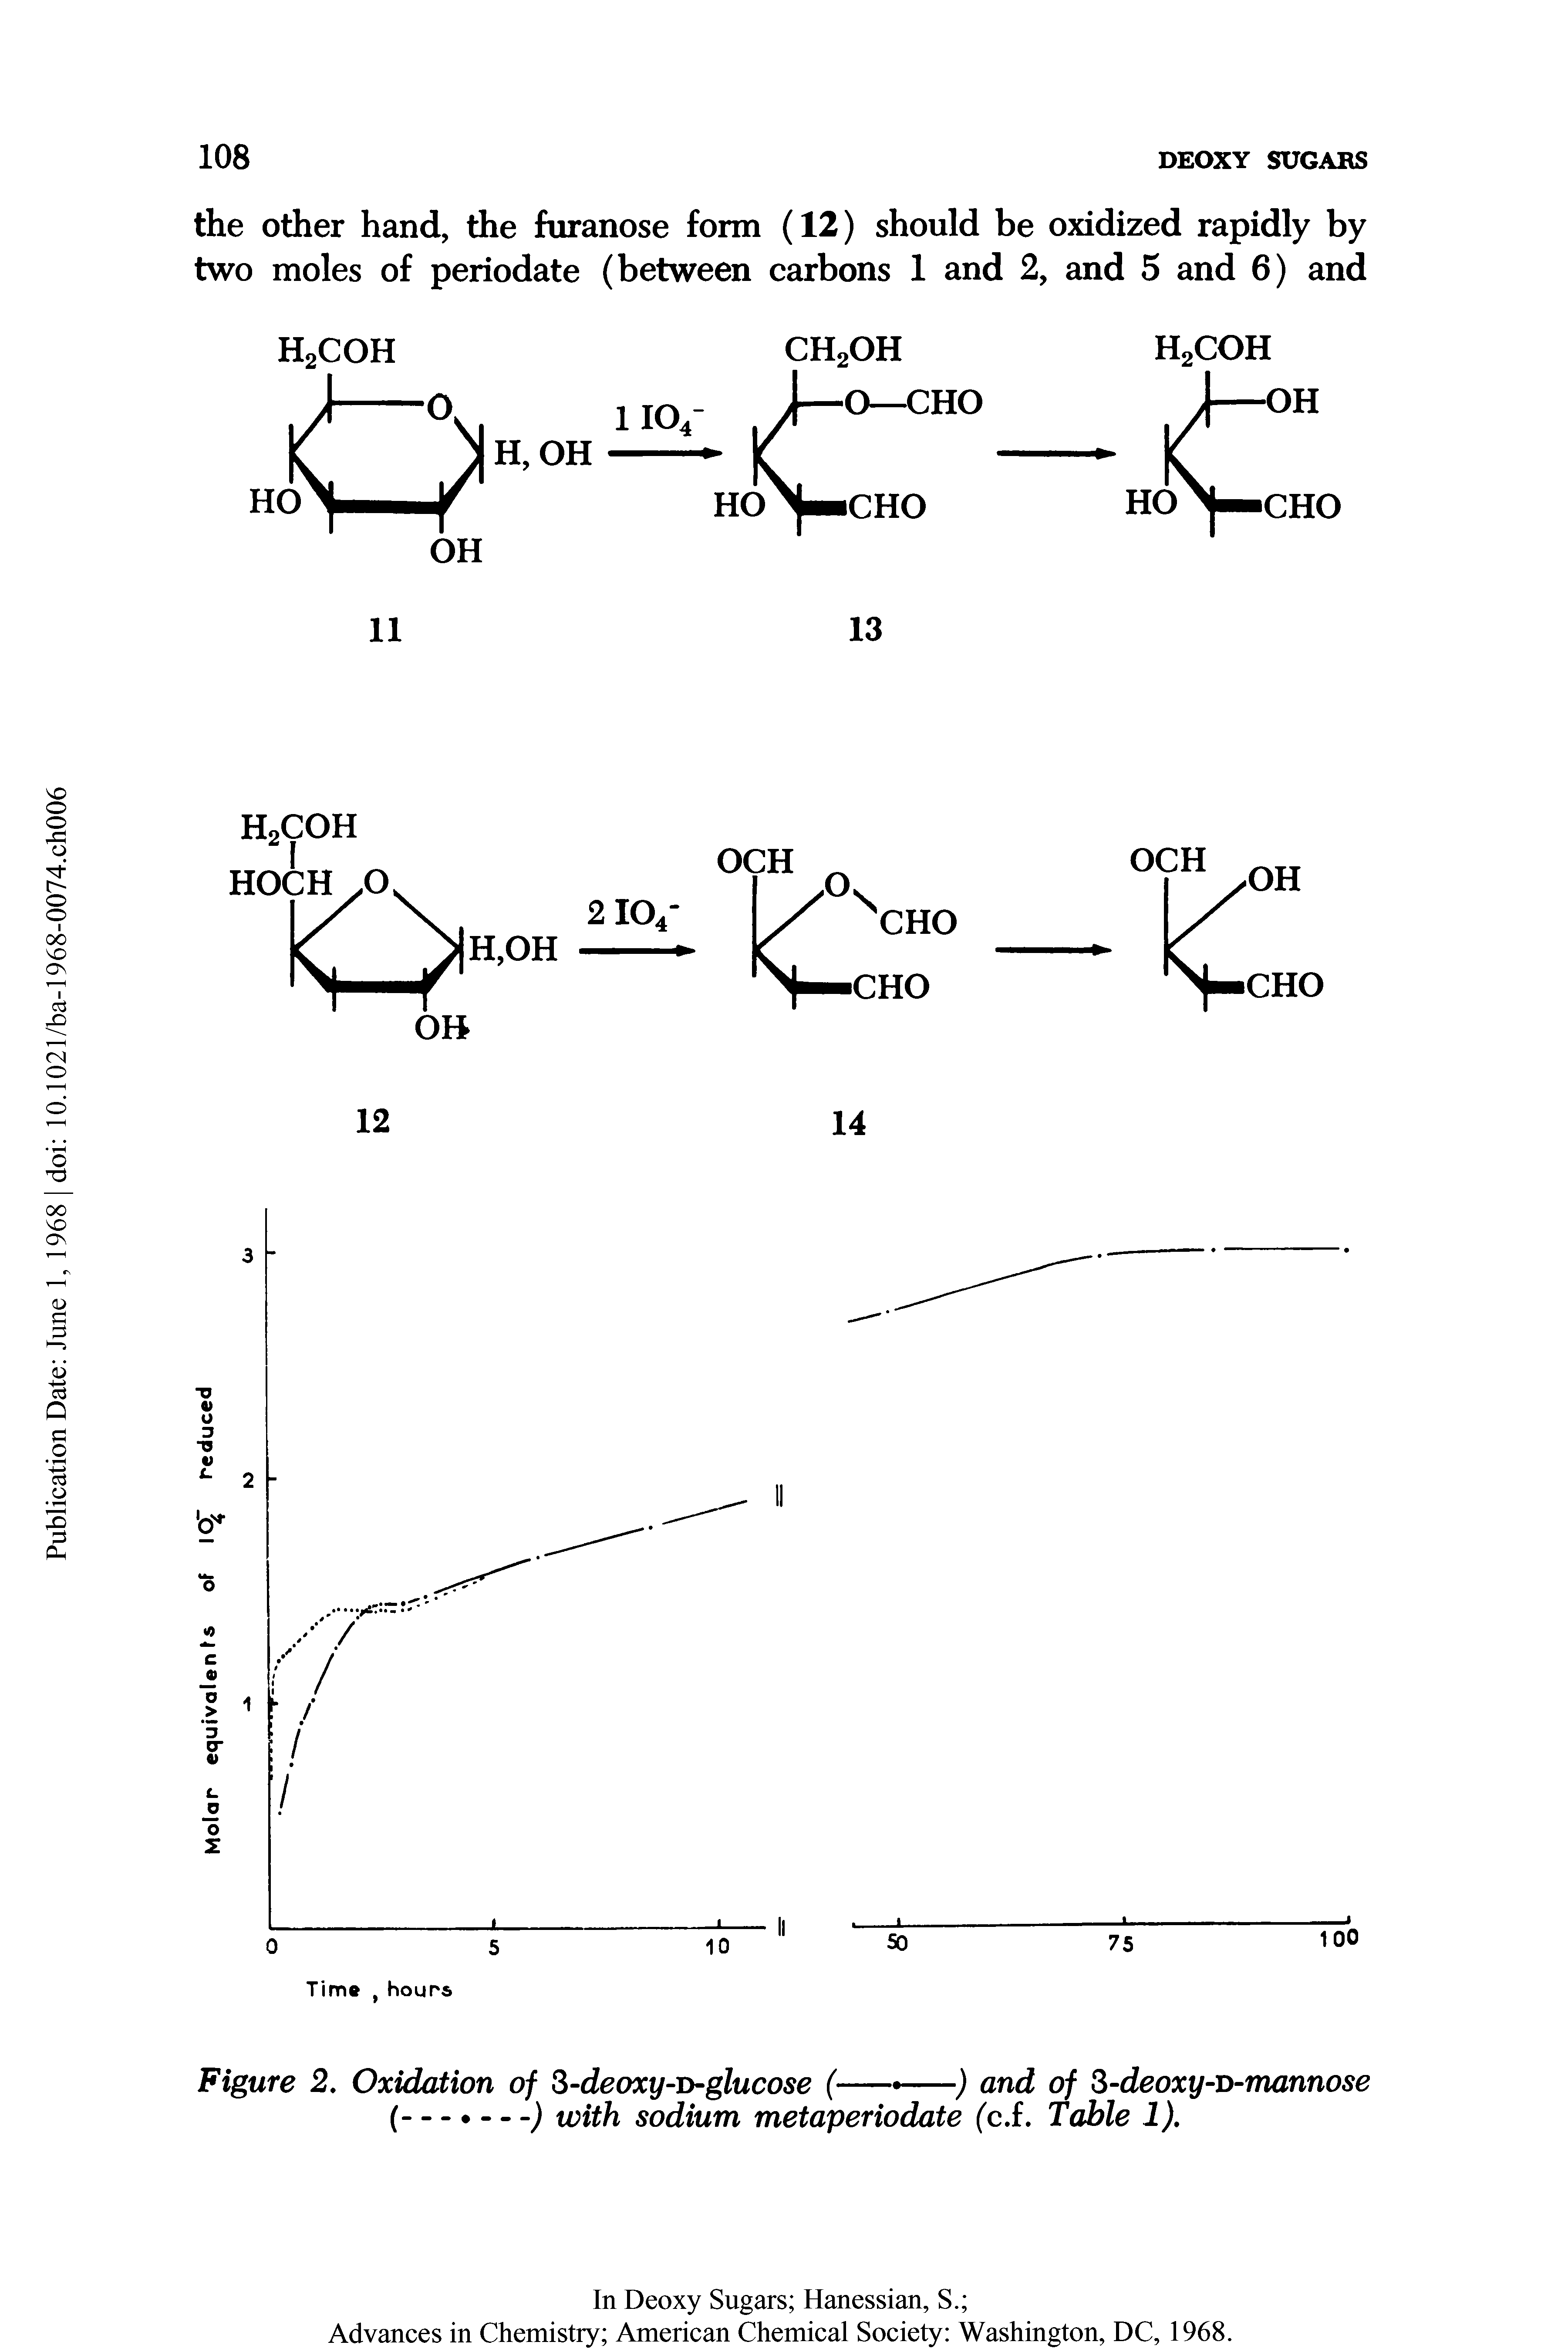 Figure 2. Oxidation of S-deoxy-i>glucose (---—) and of 3-deoxy-n-mannose...